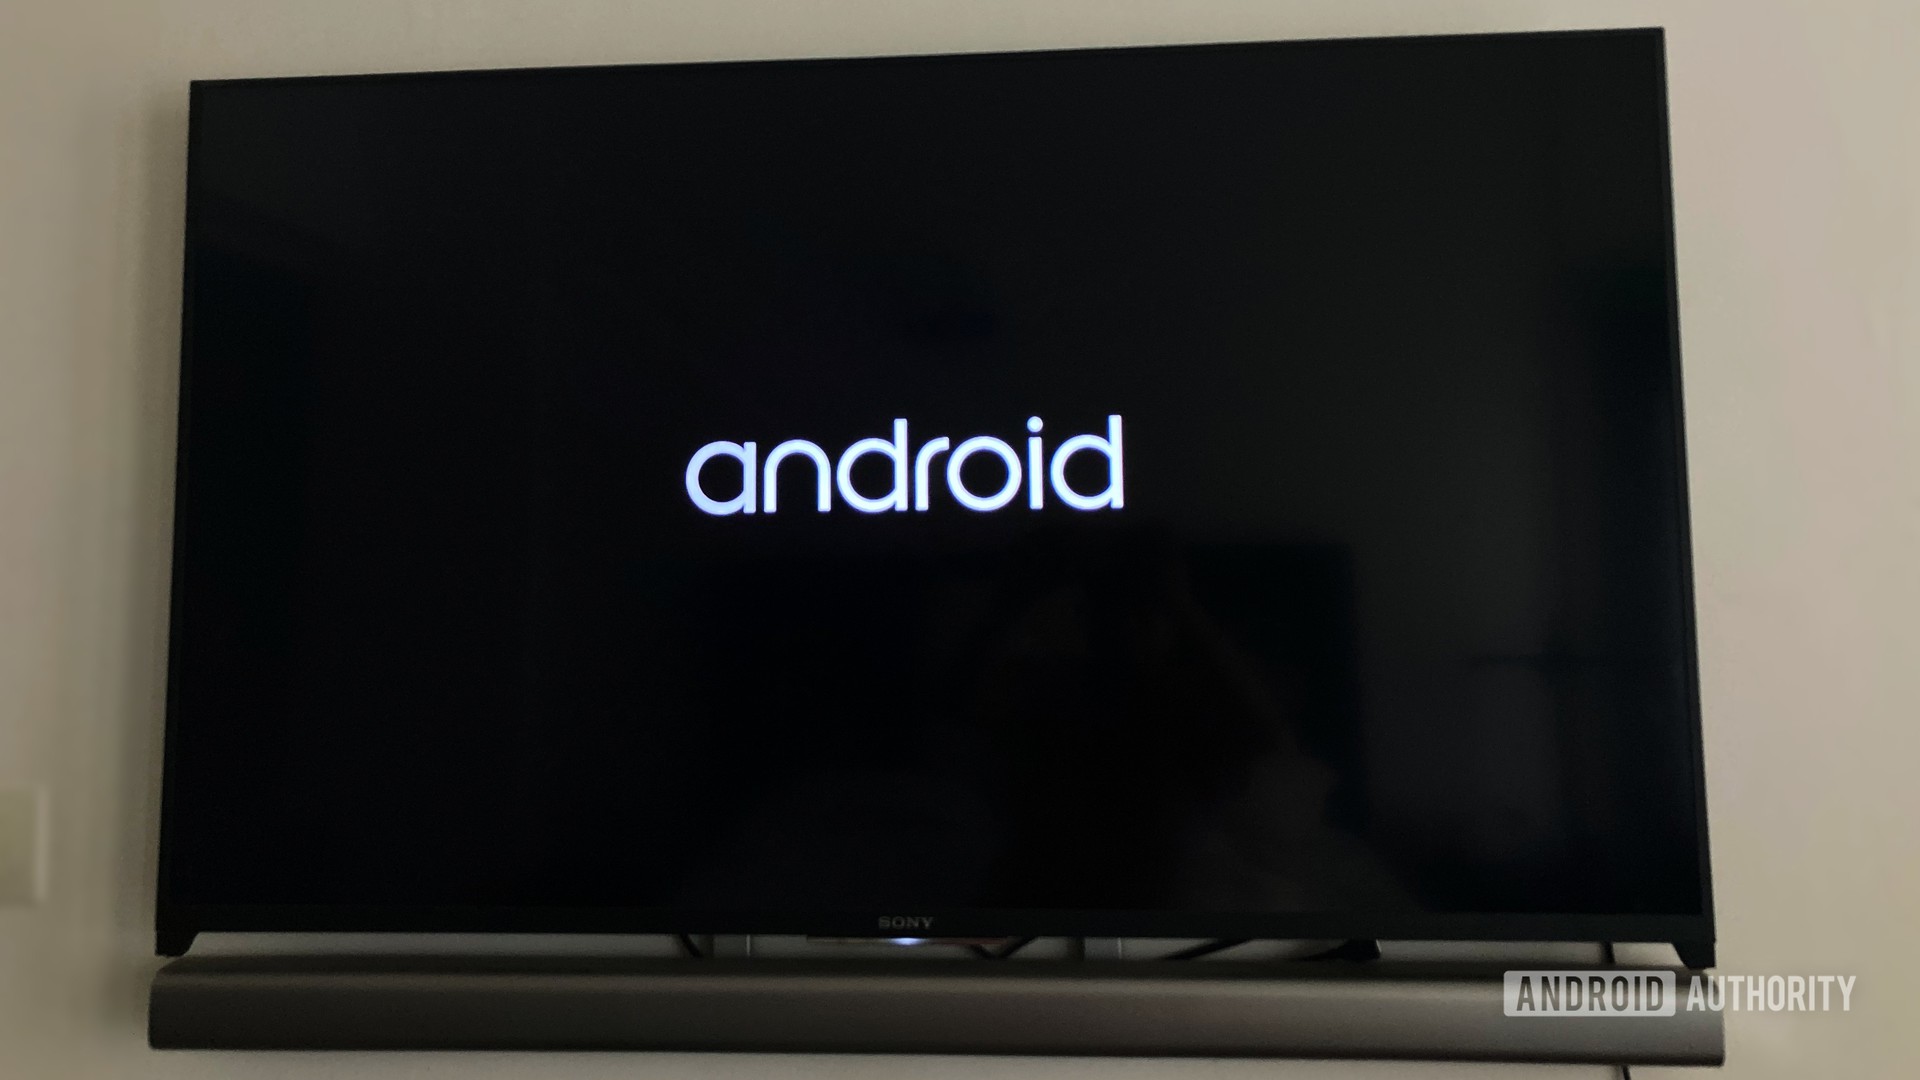 Android TV vs webOS: What are the differences and which is better?